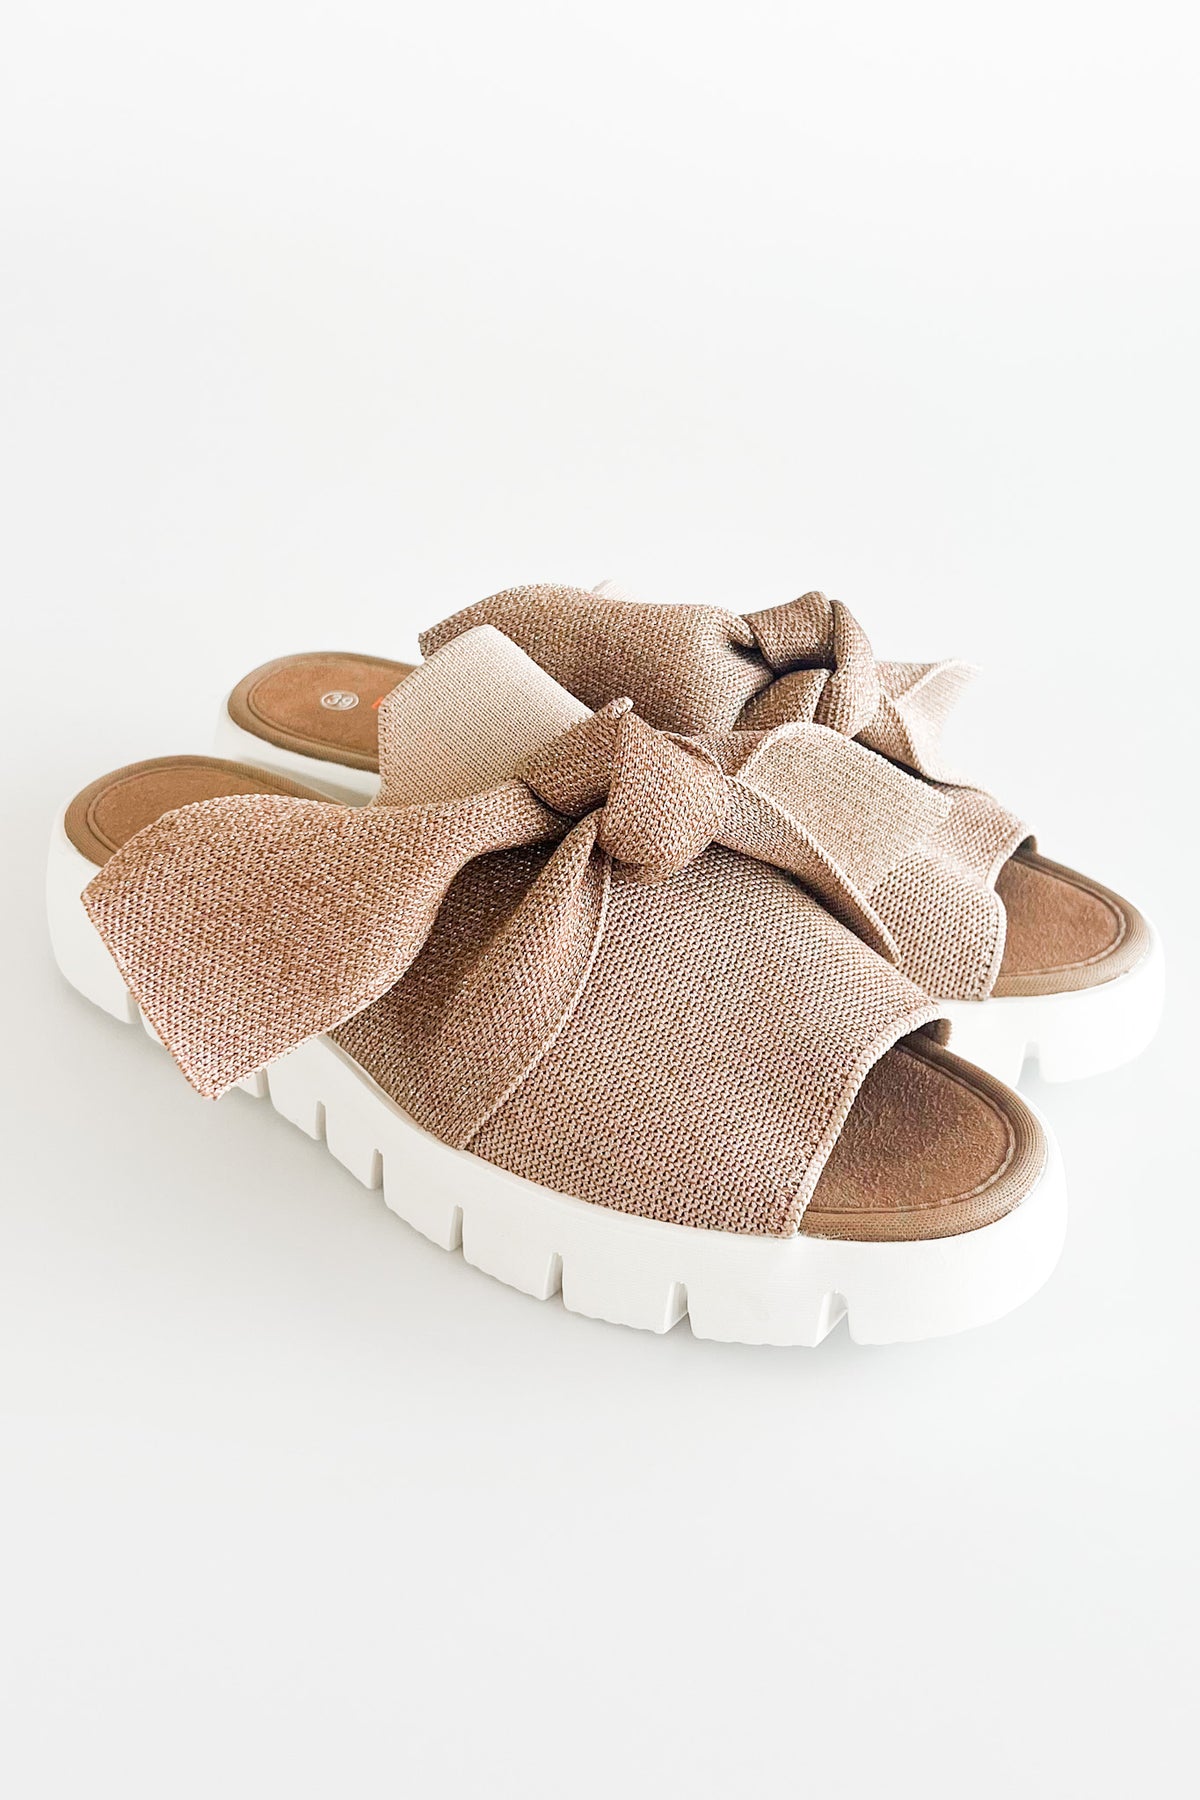 Sparkle Bow Slide - Blush Rose Gold-250 Shoes-Eliya - Bernie-Coastal Bloom Boutique, find the trendiest versions of the popular styles and looks Located in Indialantic, FL